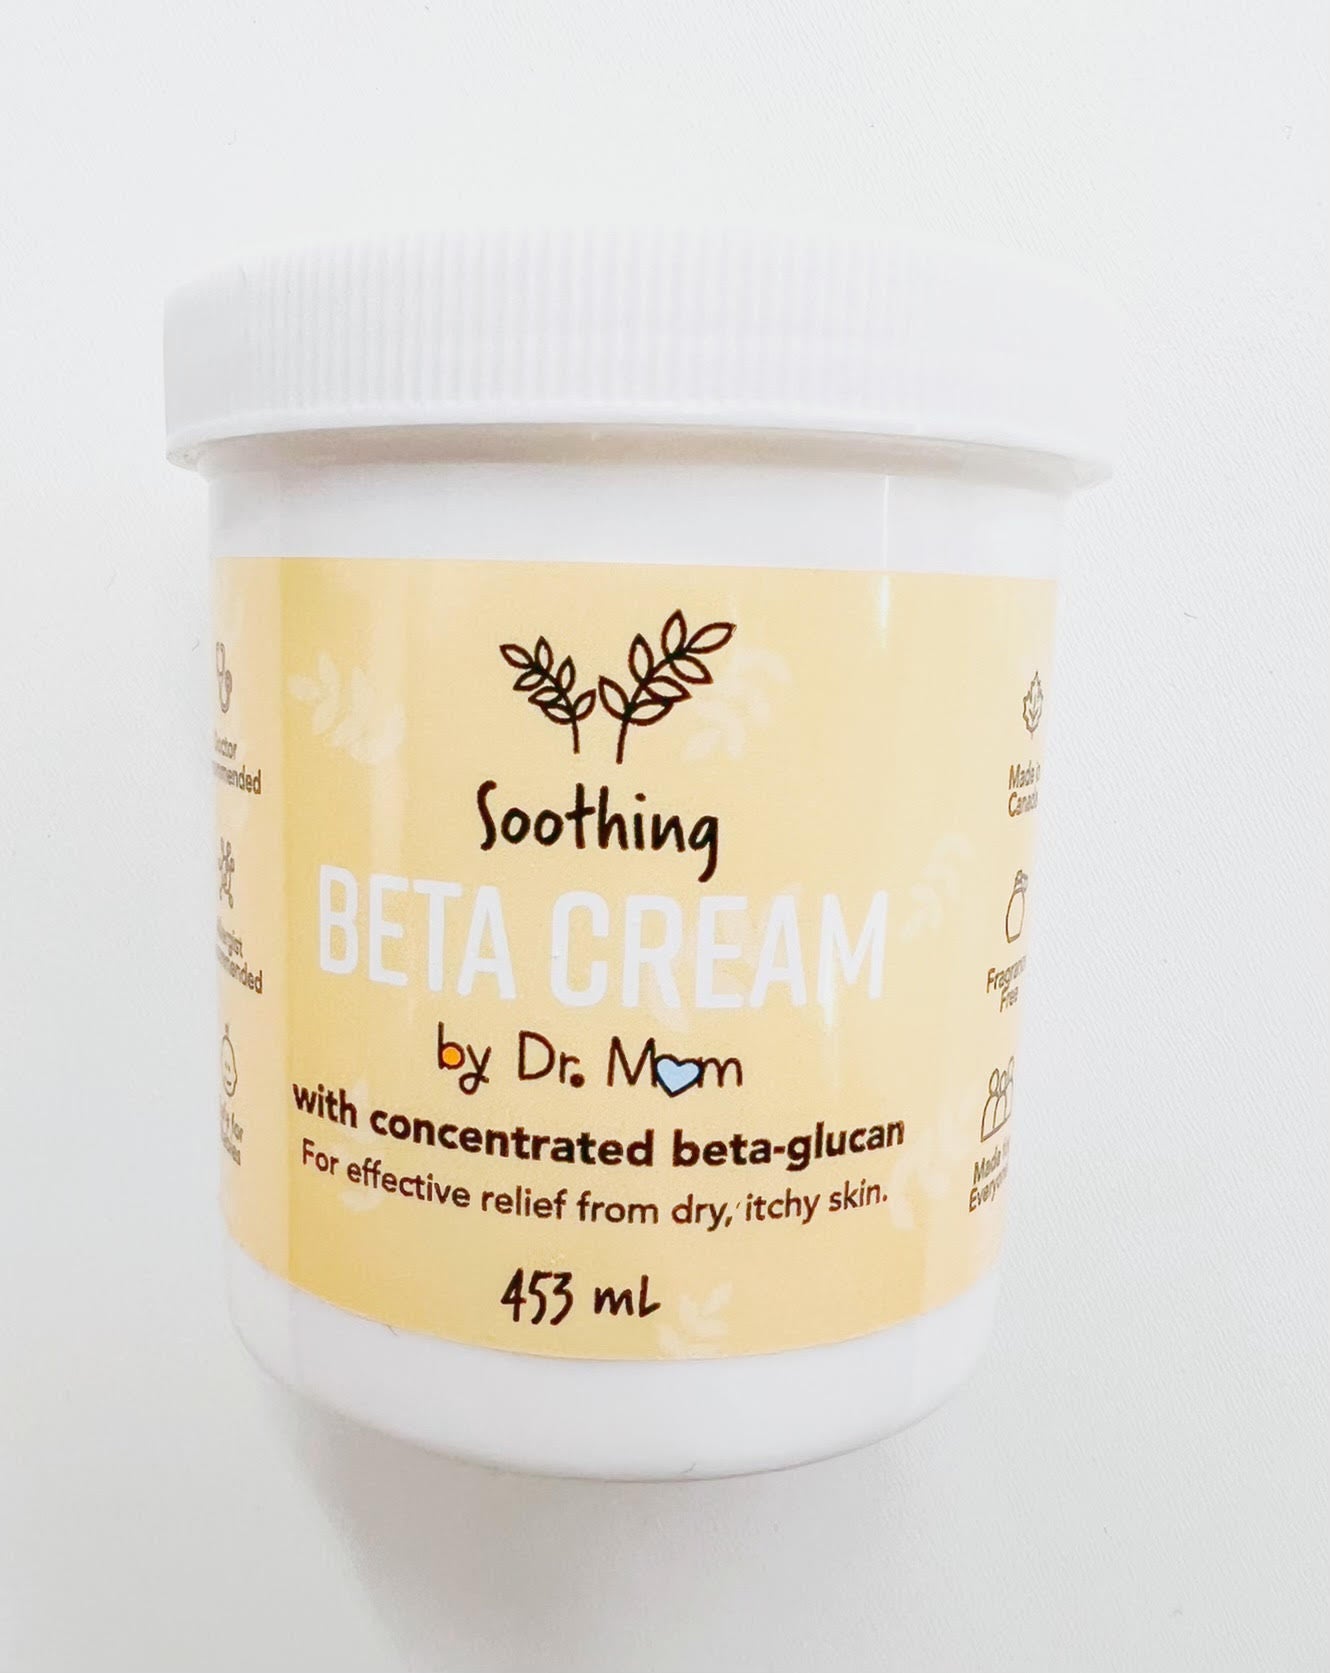 Dr. Mom Soothing Beta Cream